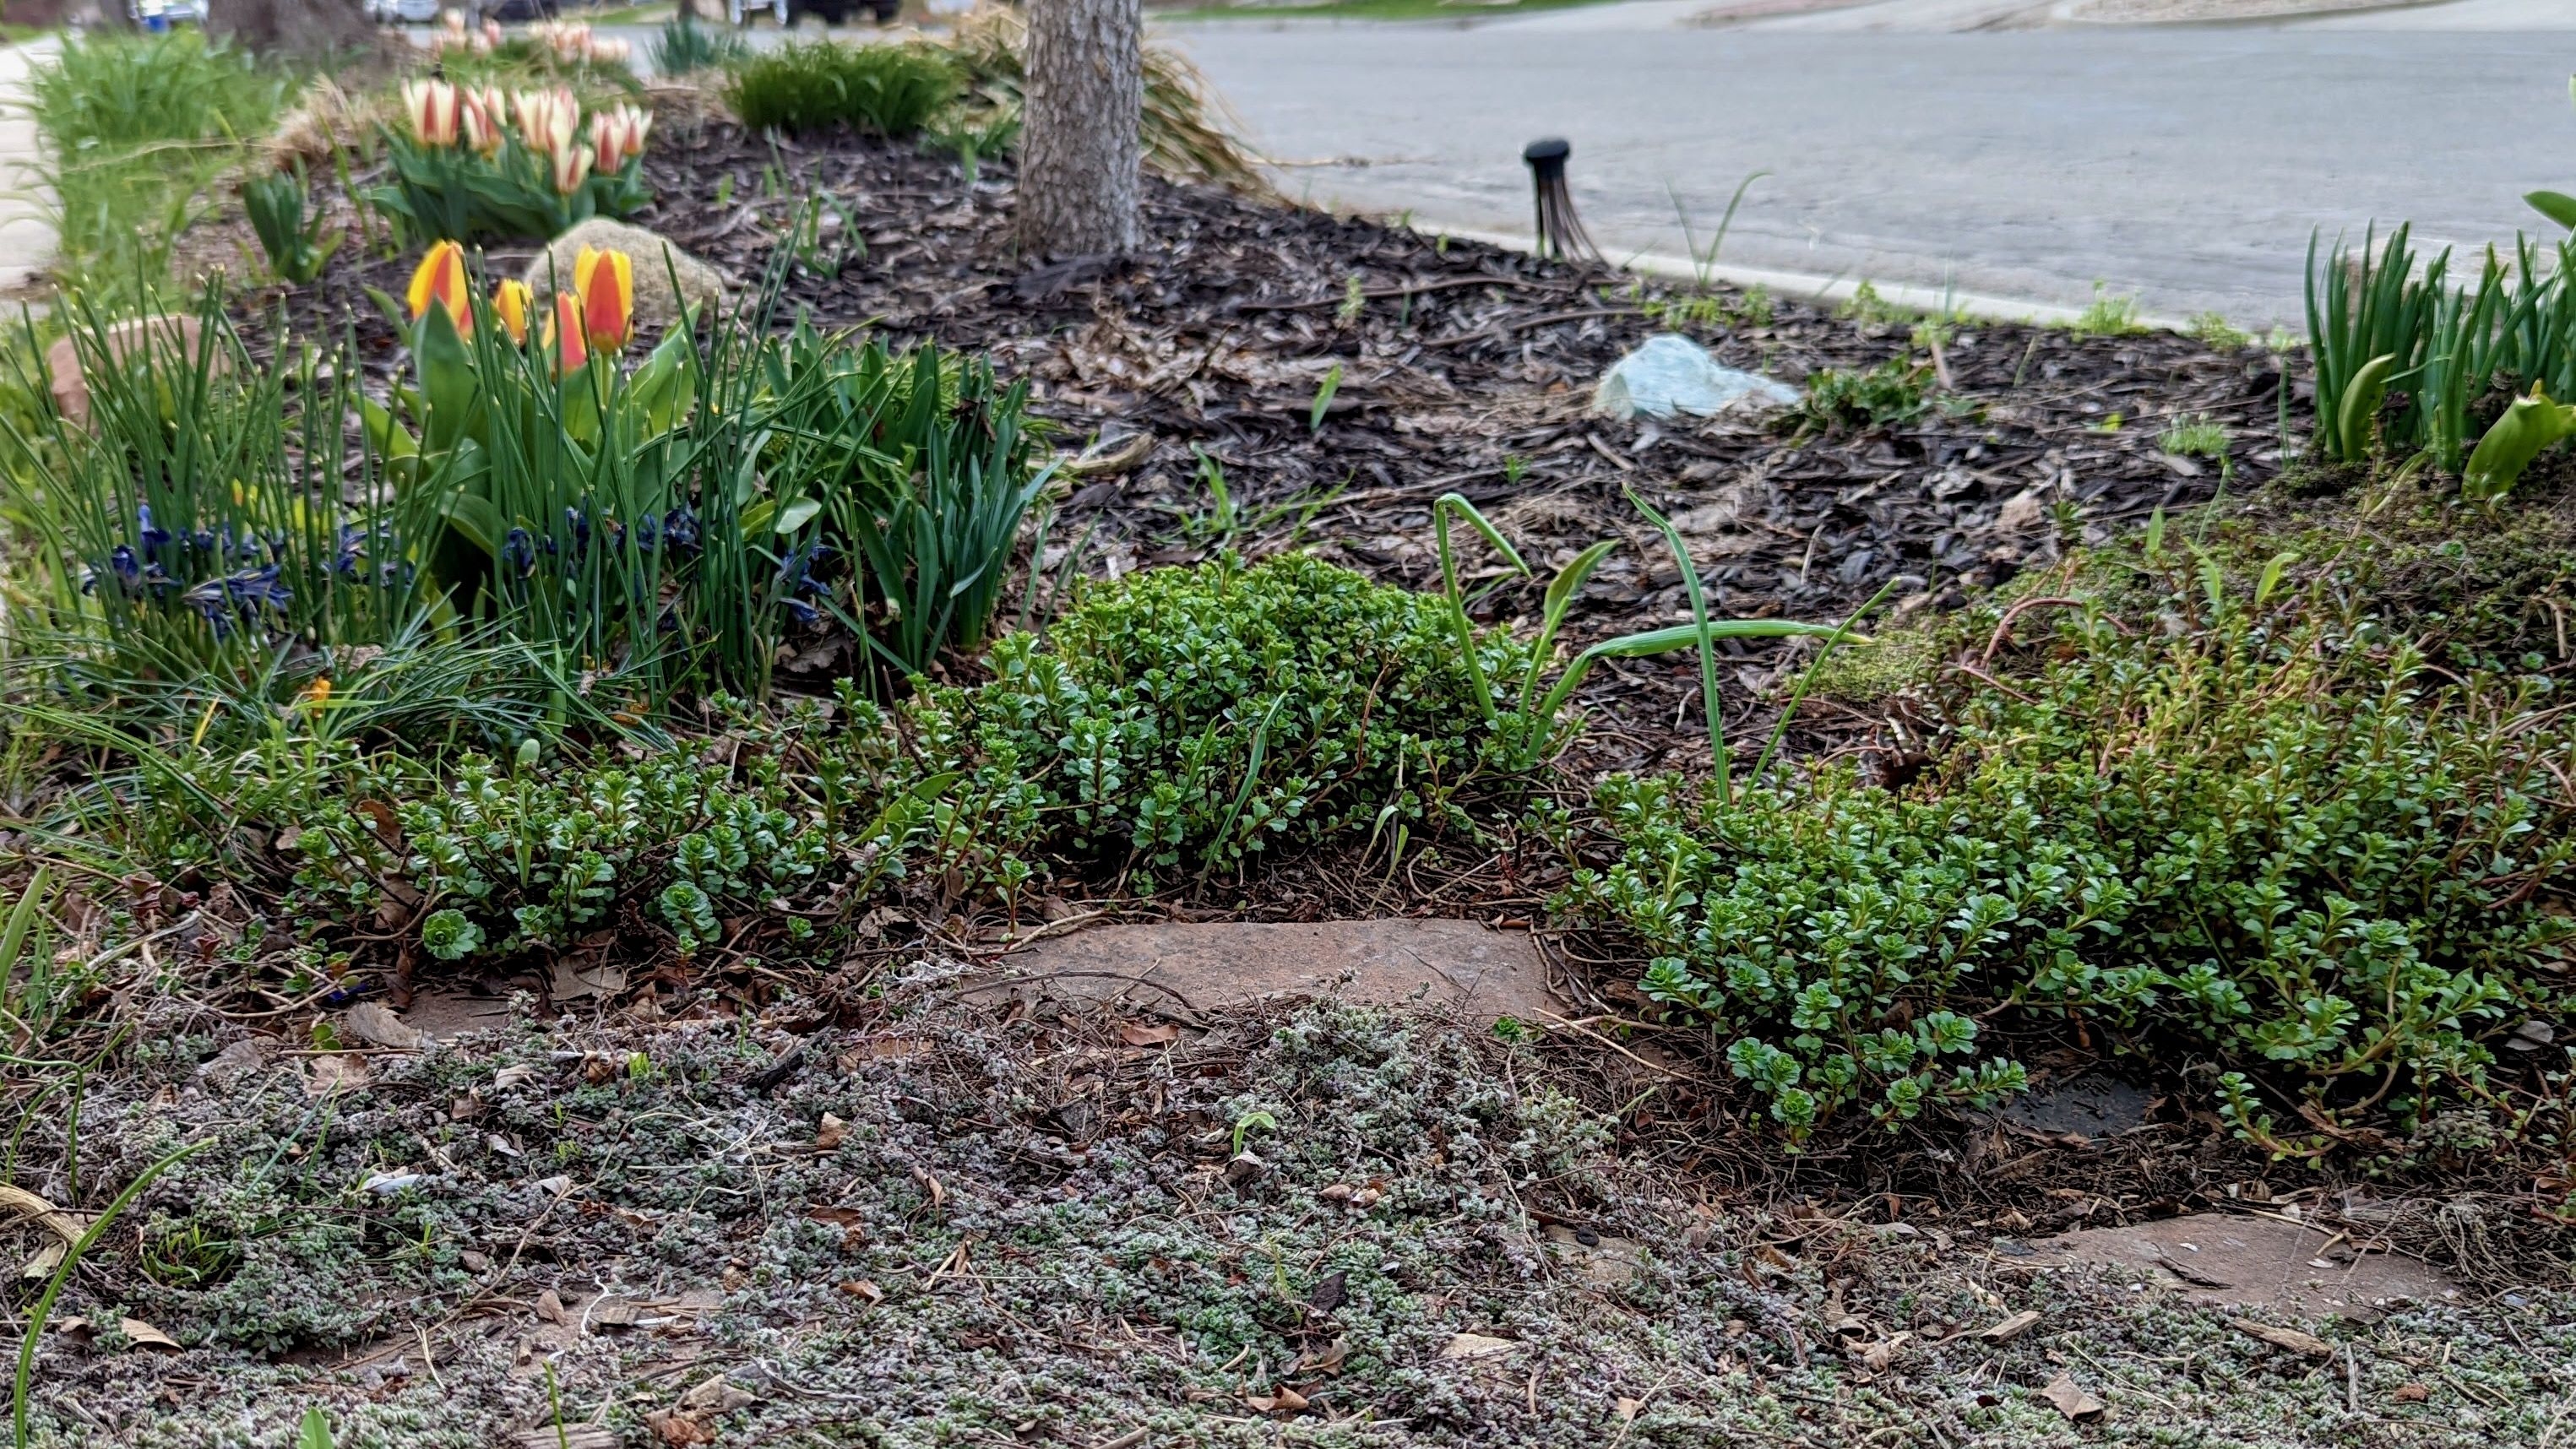 Sedum grows in front of tulips in early spring.